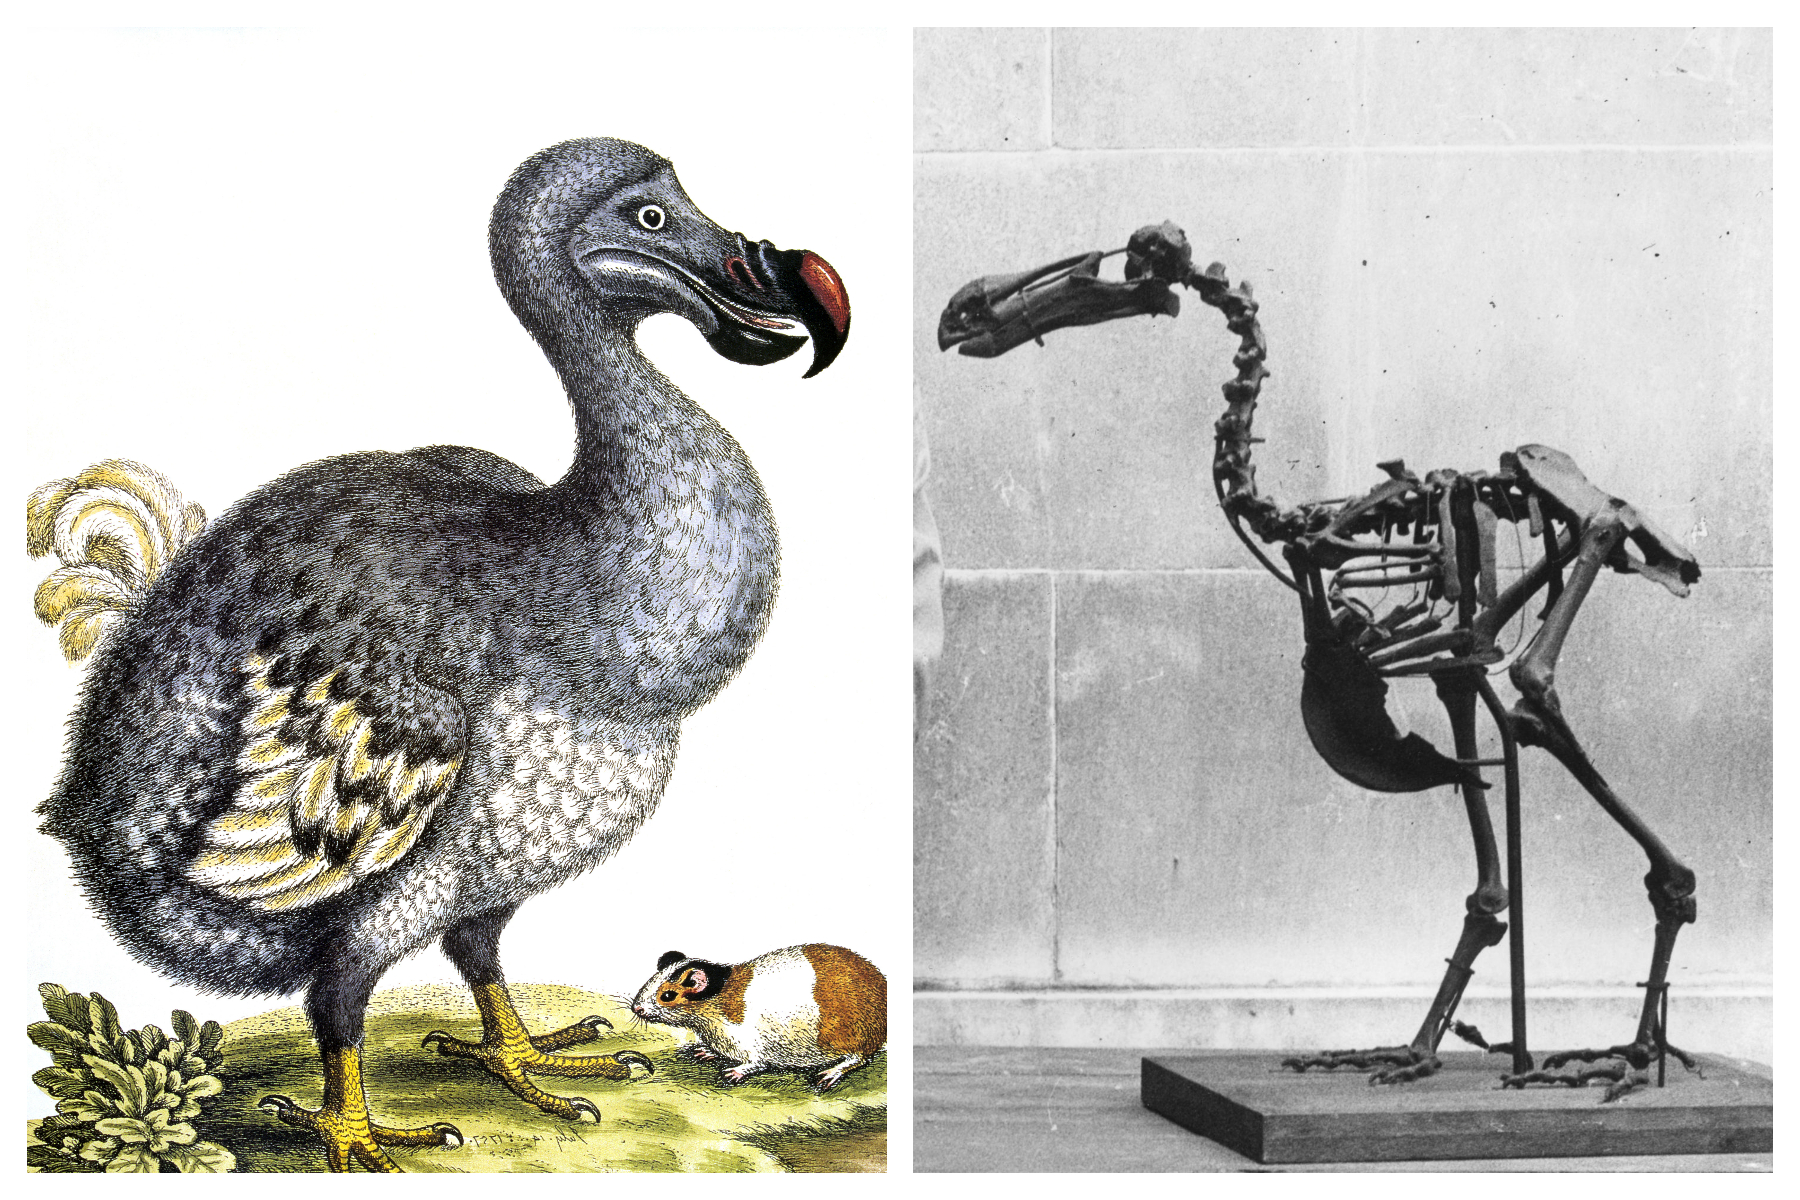 De-Extinction Plan to Bring Back Dodo Could Have Bad Consequences